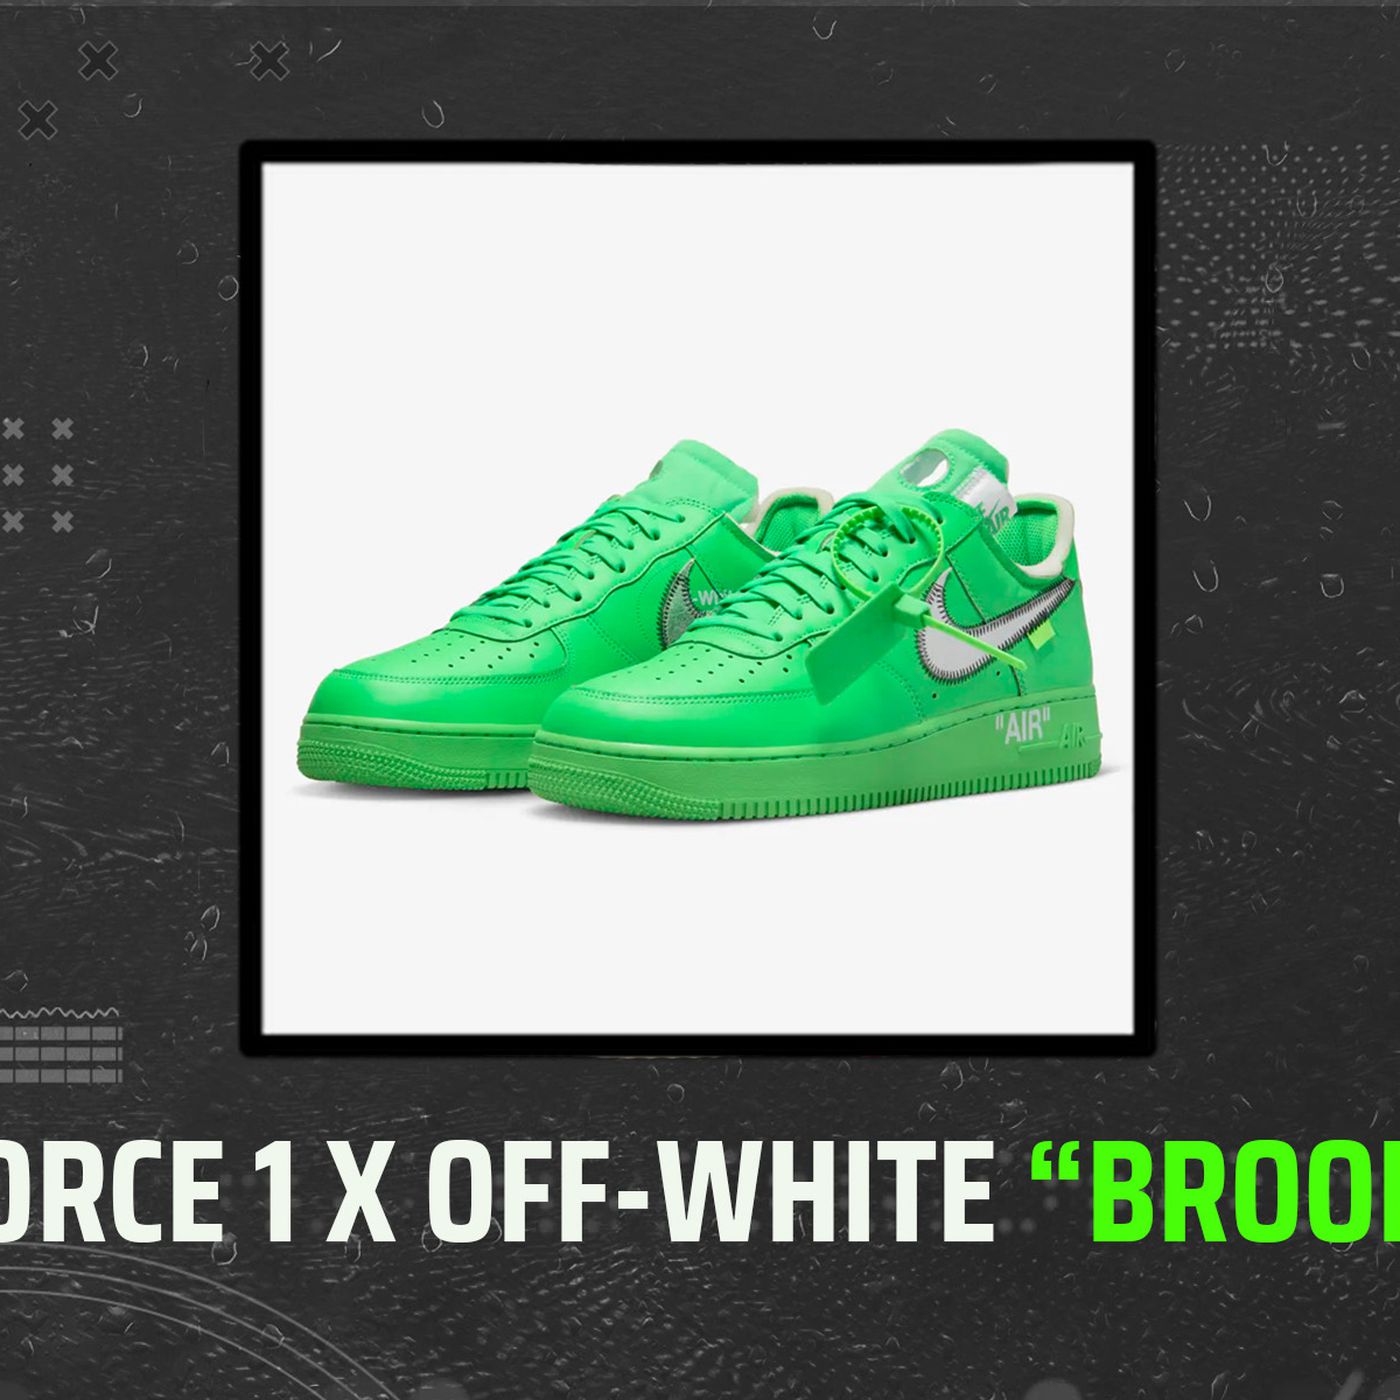 Air Force 1 x Off-White “Brooklyn”: Sneaker Release Date, Price